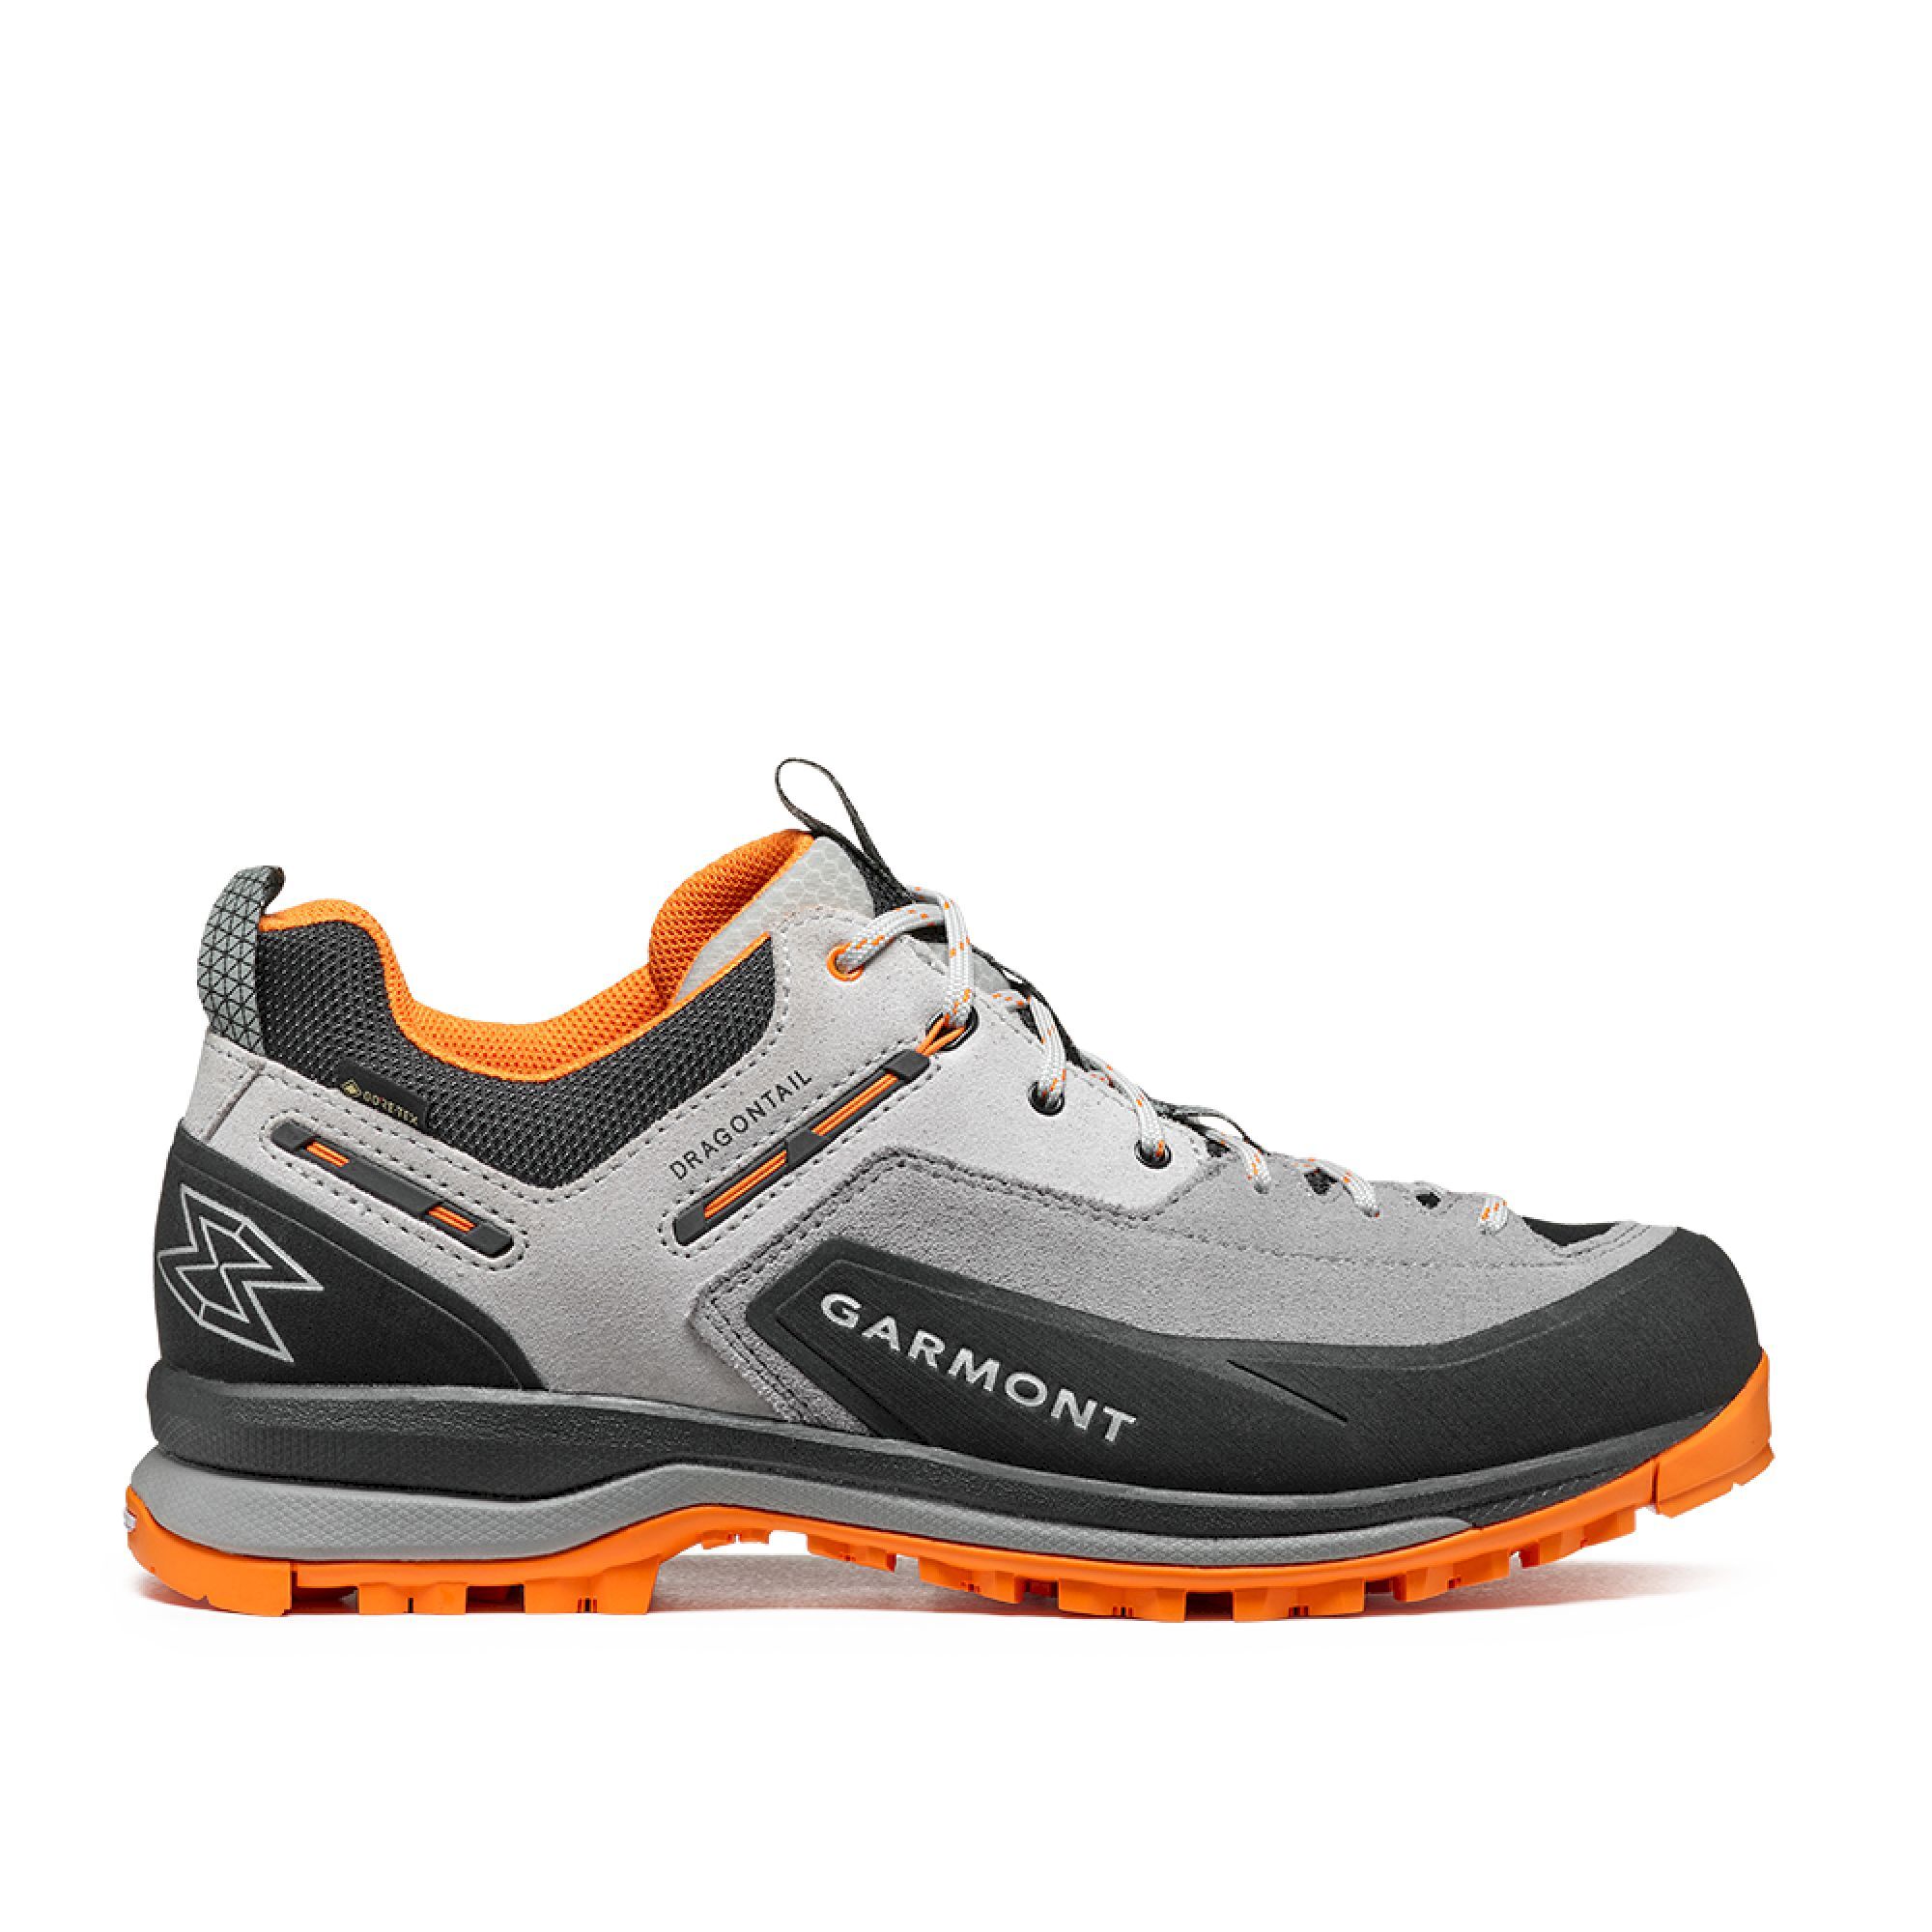 Garmont Dragontail Tech GTX - Limited Edition - Approach boty | Hardloop